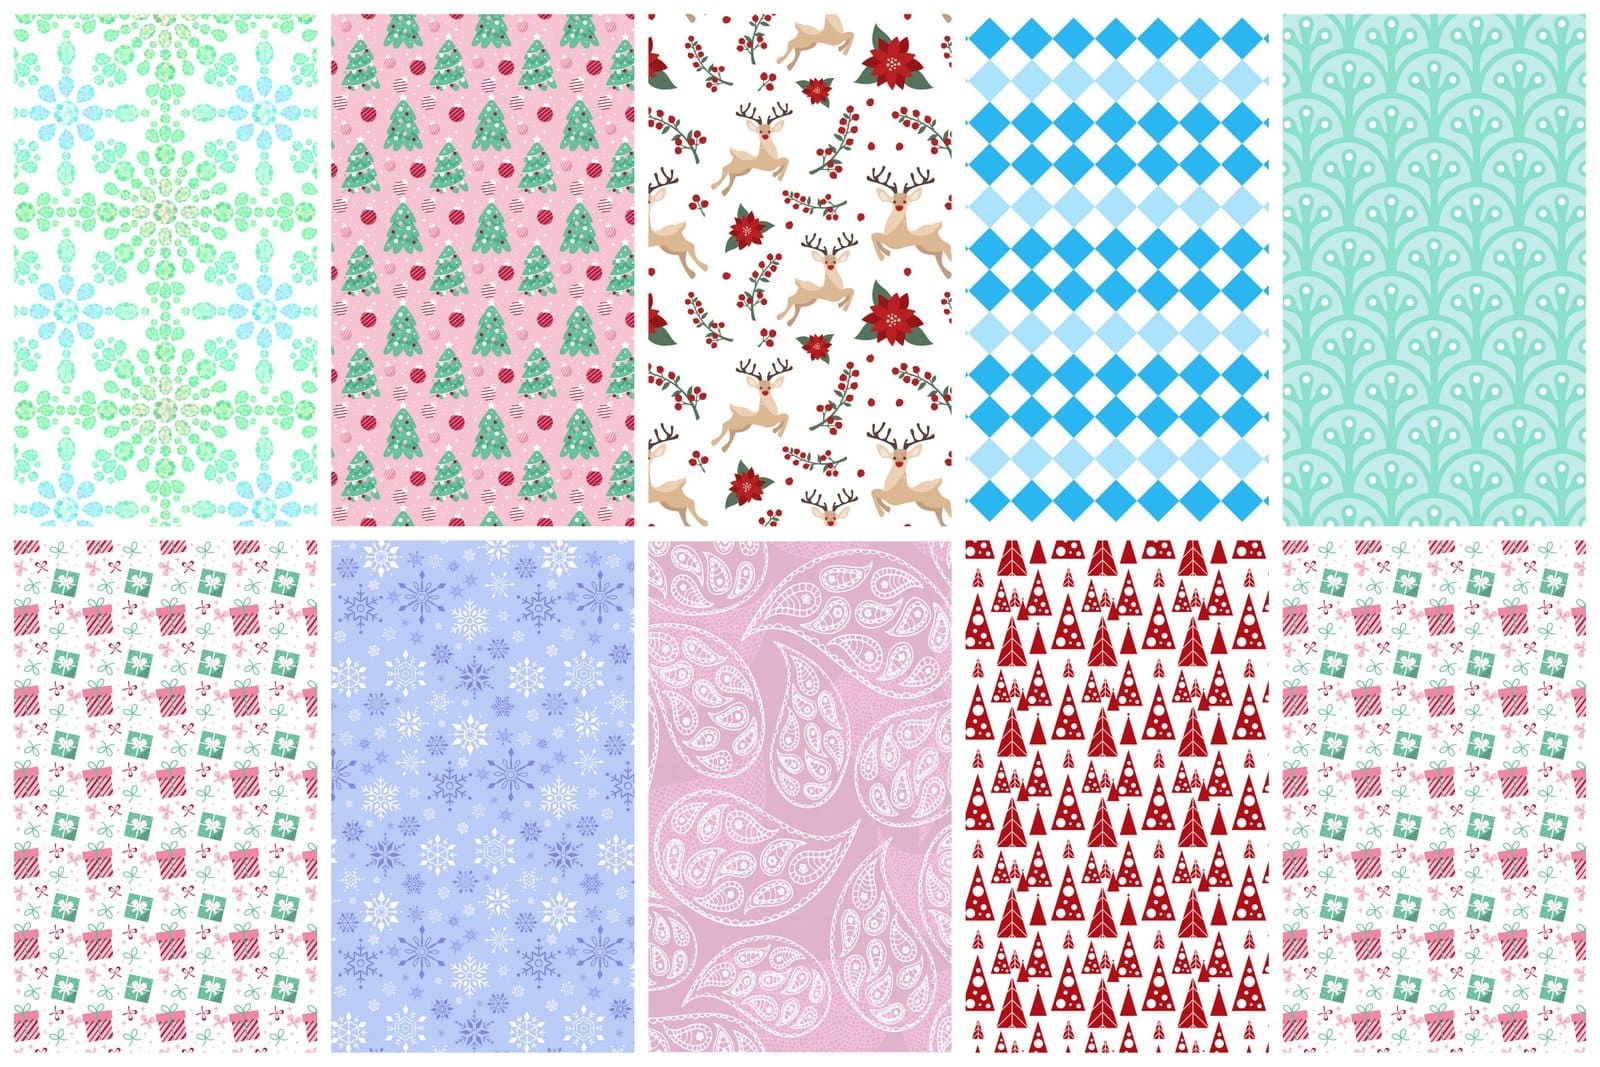 Instant wrapping paper Free downloadable gift wrap